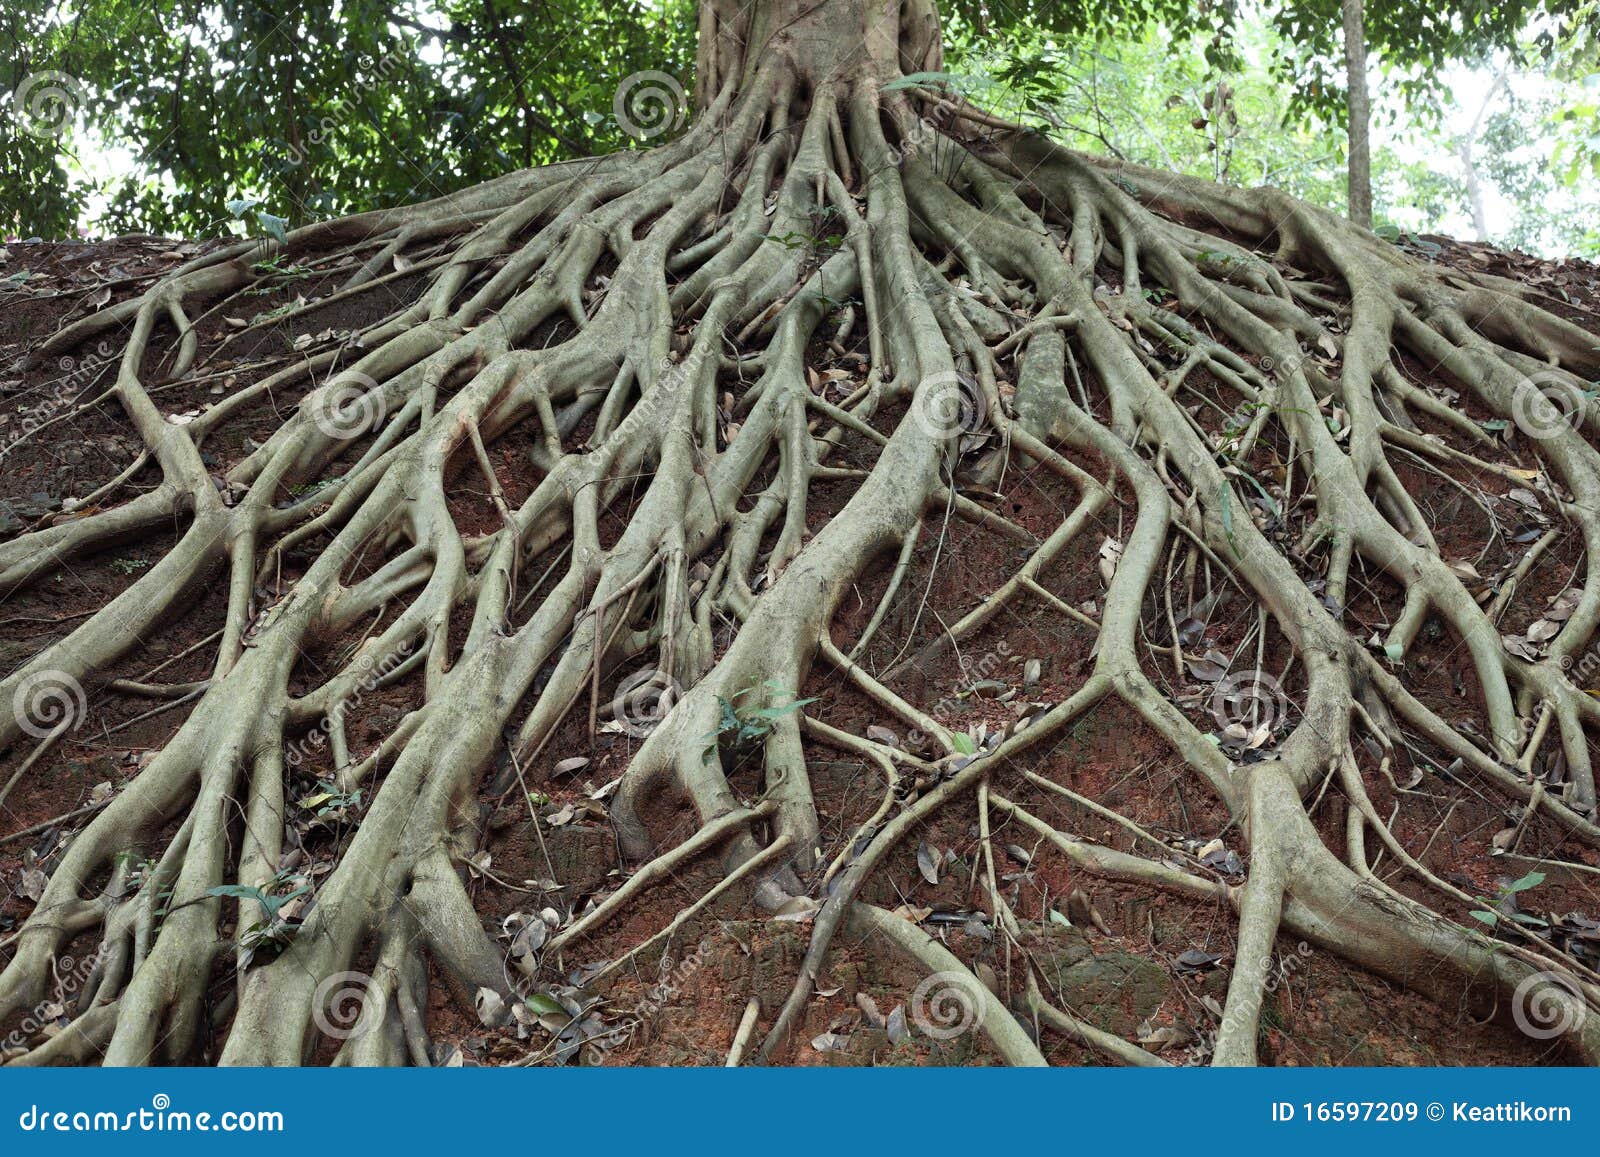 amazing chaos tree roots